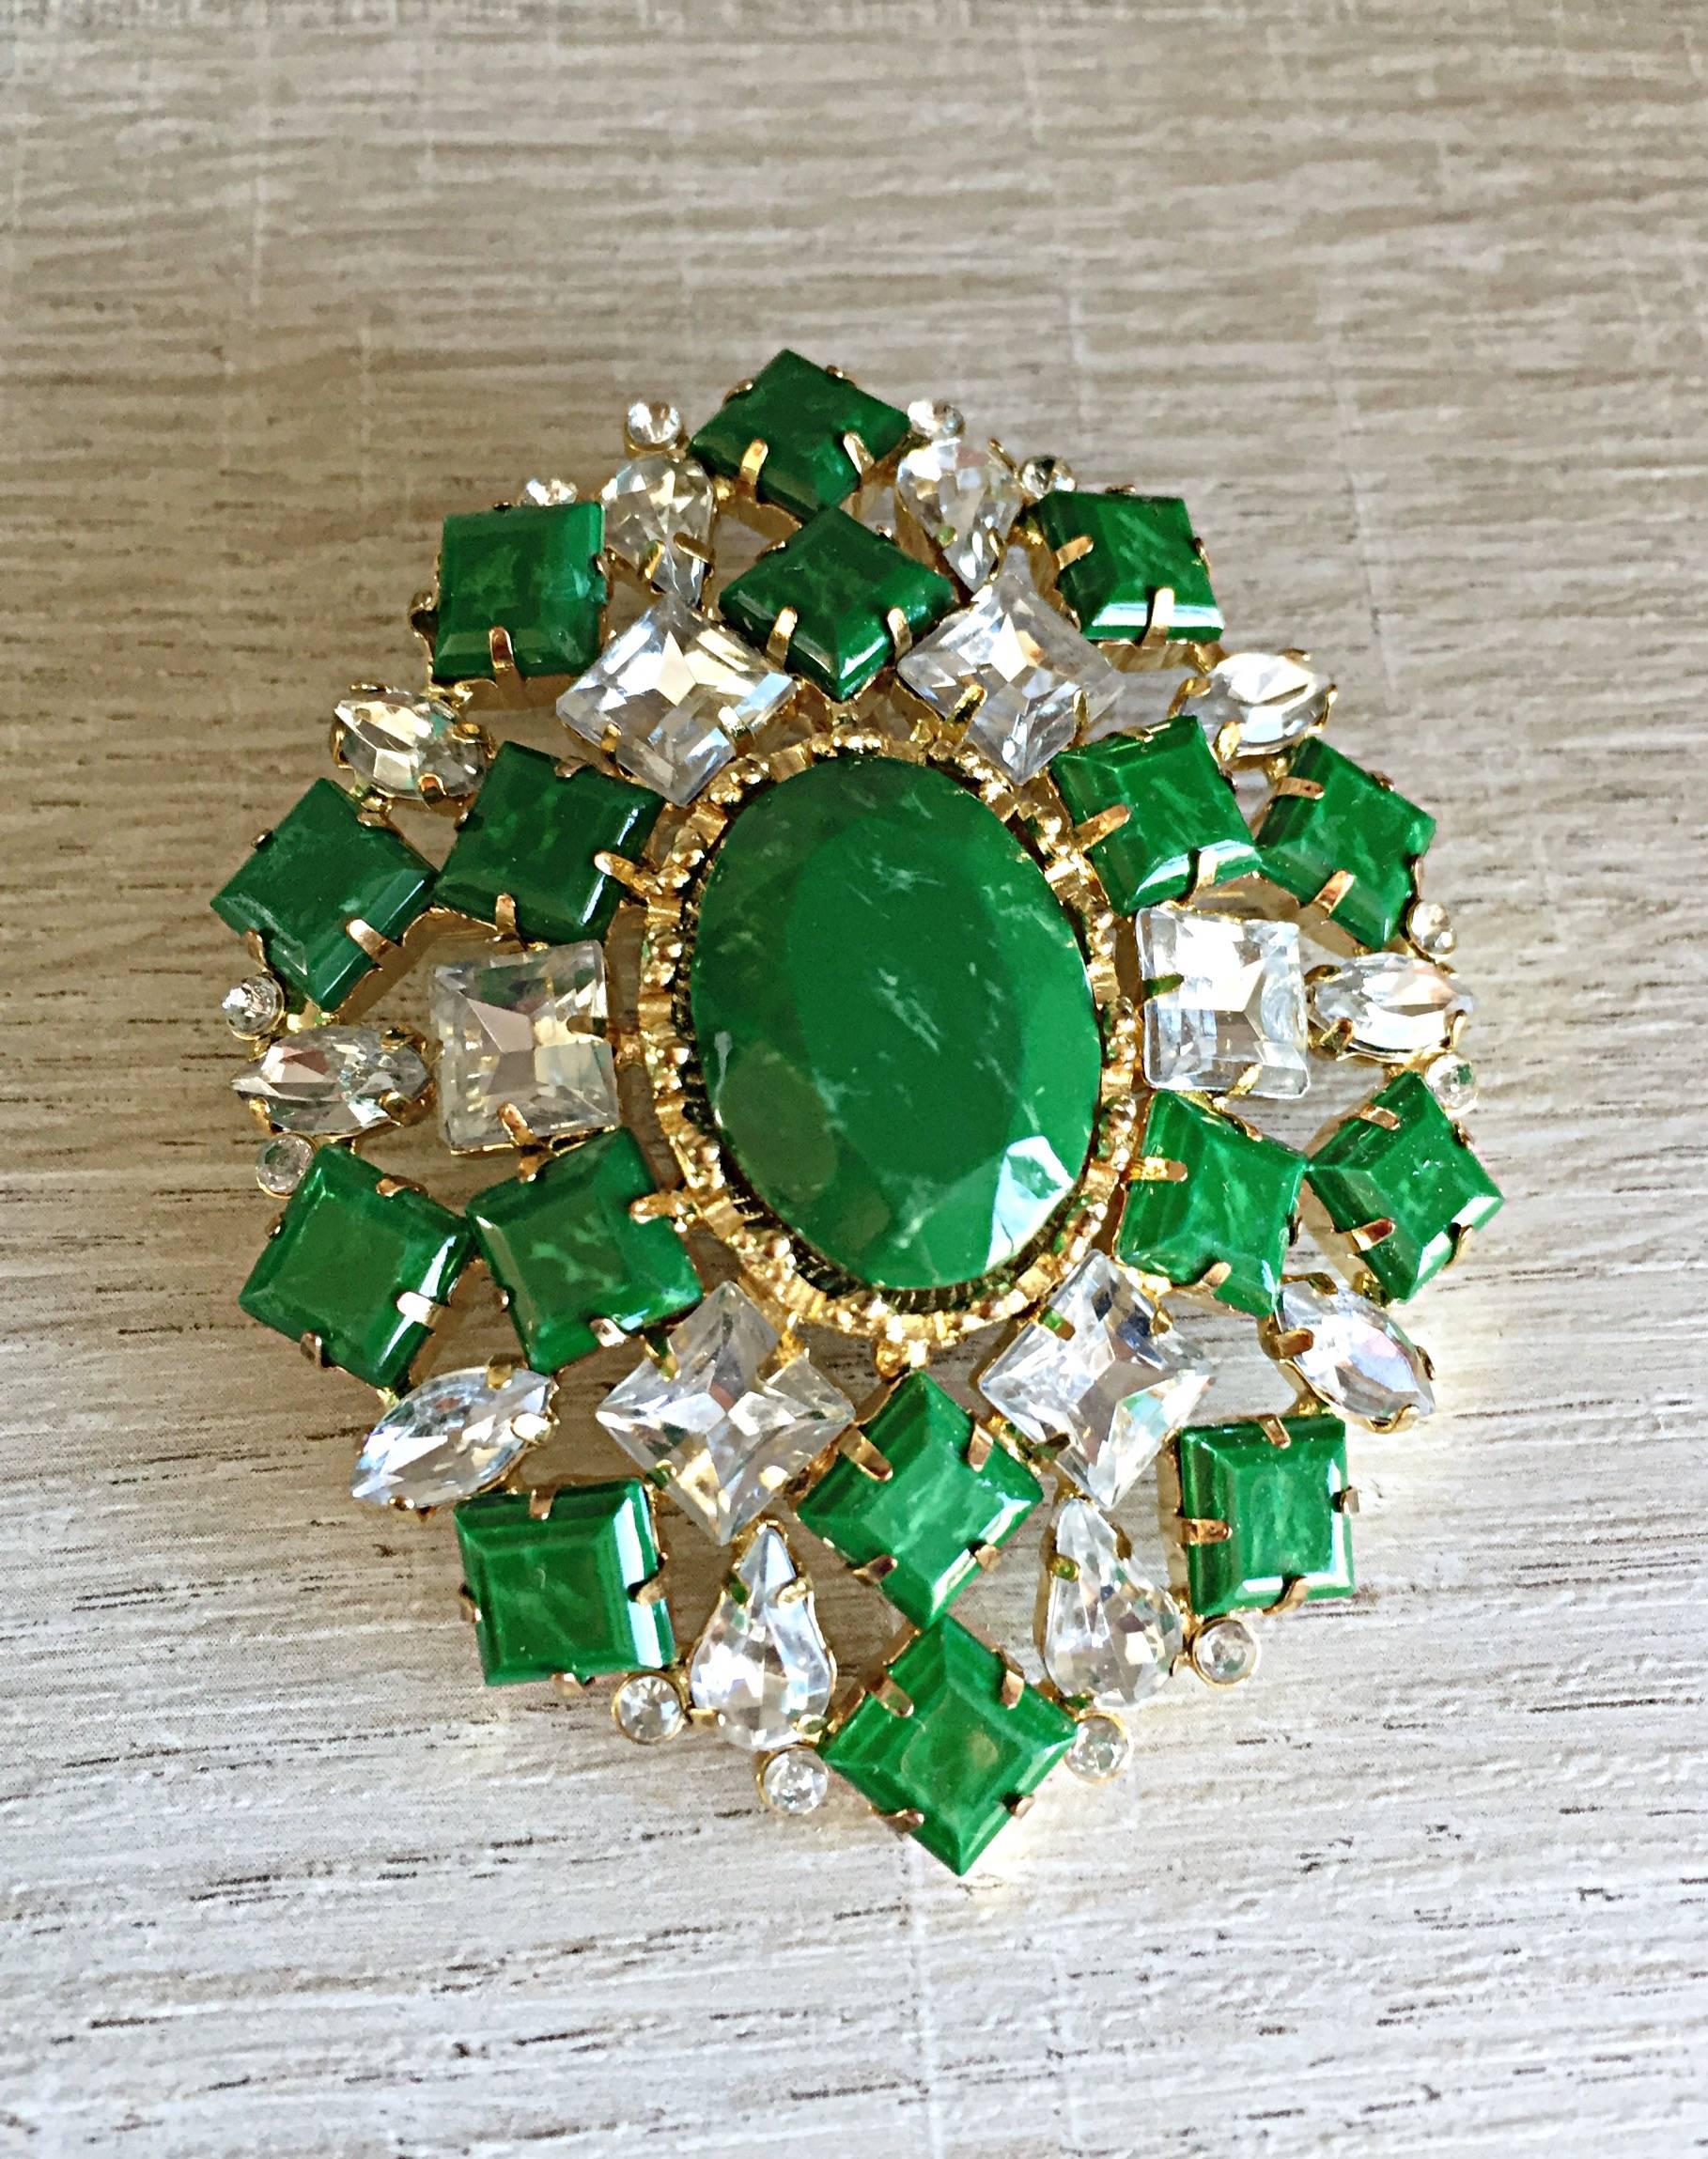 Amazing vintage 60s ARNOLD SCAASI signed large emerald green and rhinestone brooch pin! Features opaque vibrant green mixed with rhinestones. This gem can really make an outfit. Perfect on a blazer, sweater, or jacket. Would look amazing pinned to a